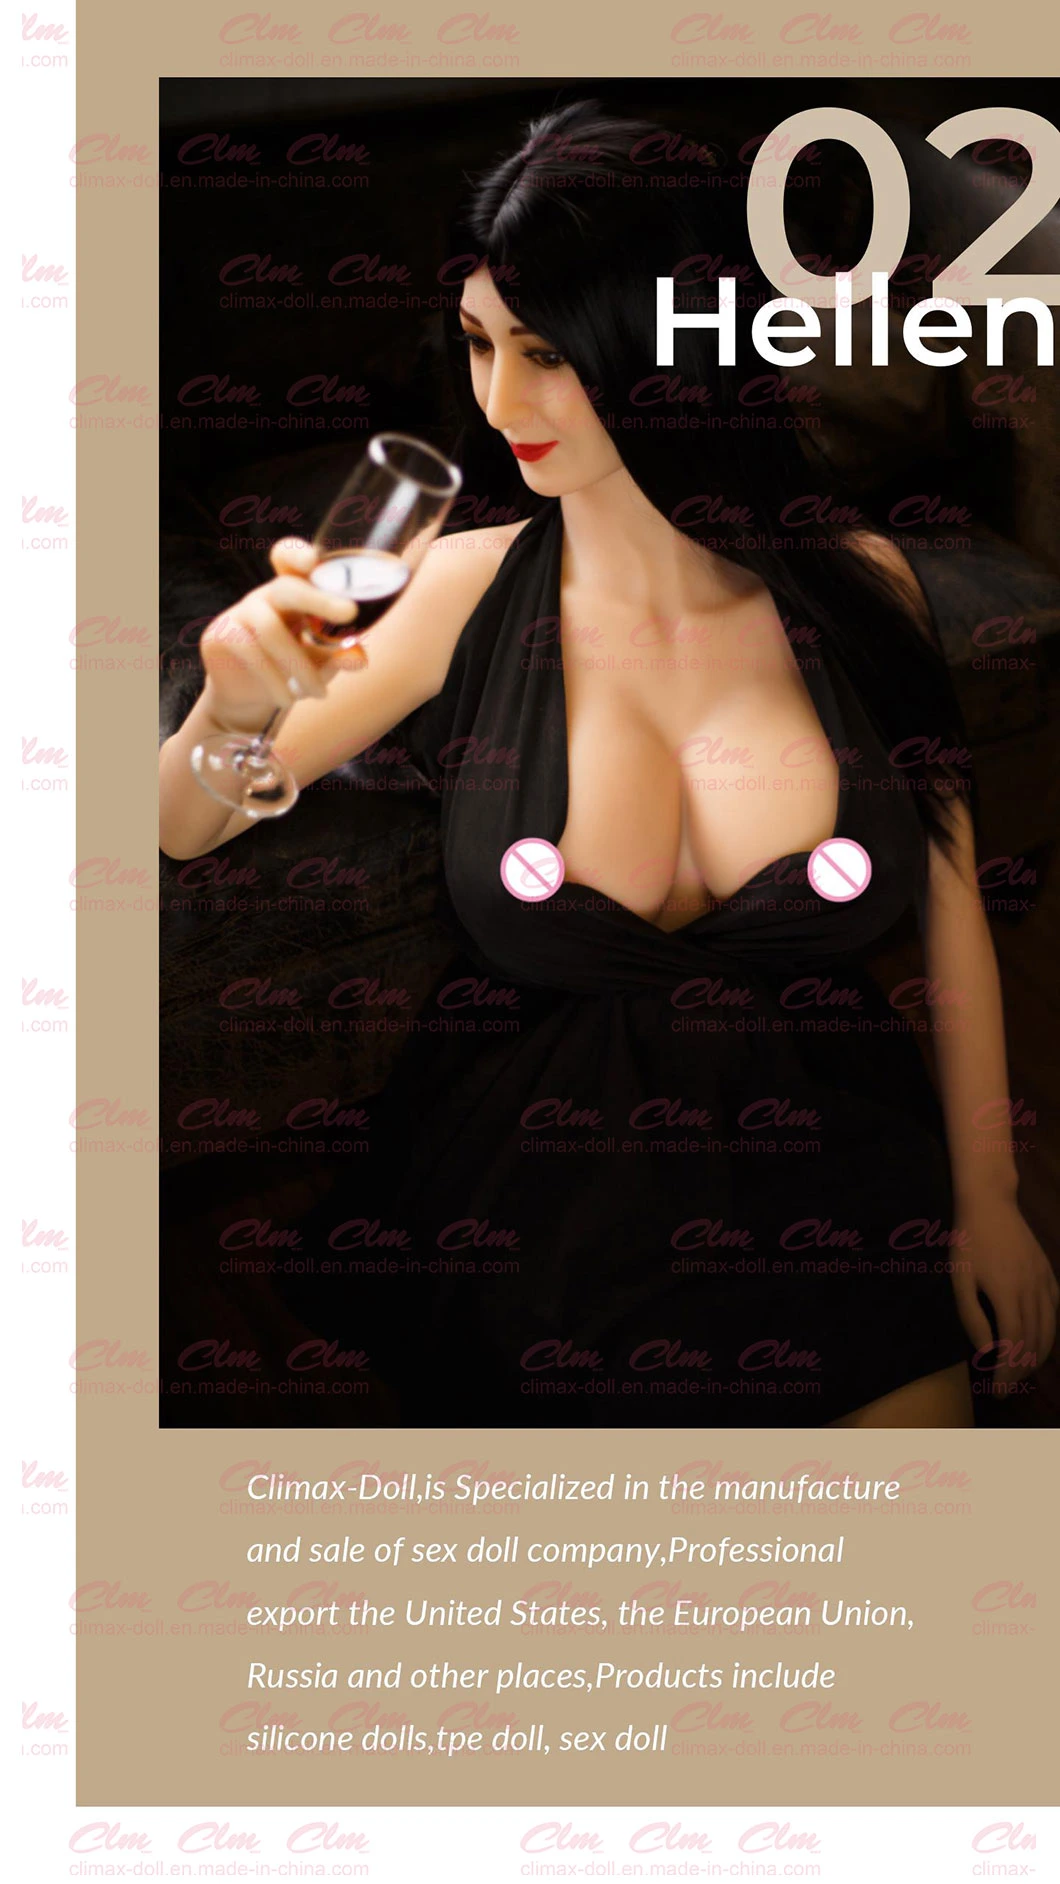 Clm (Climax Doll) 160cm Silicone Sex Dolls Big Breast Janpanse Real Love Doll Sex Toy